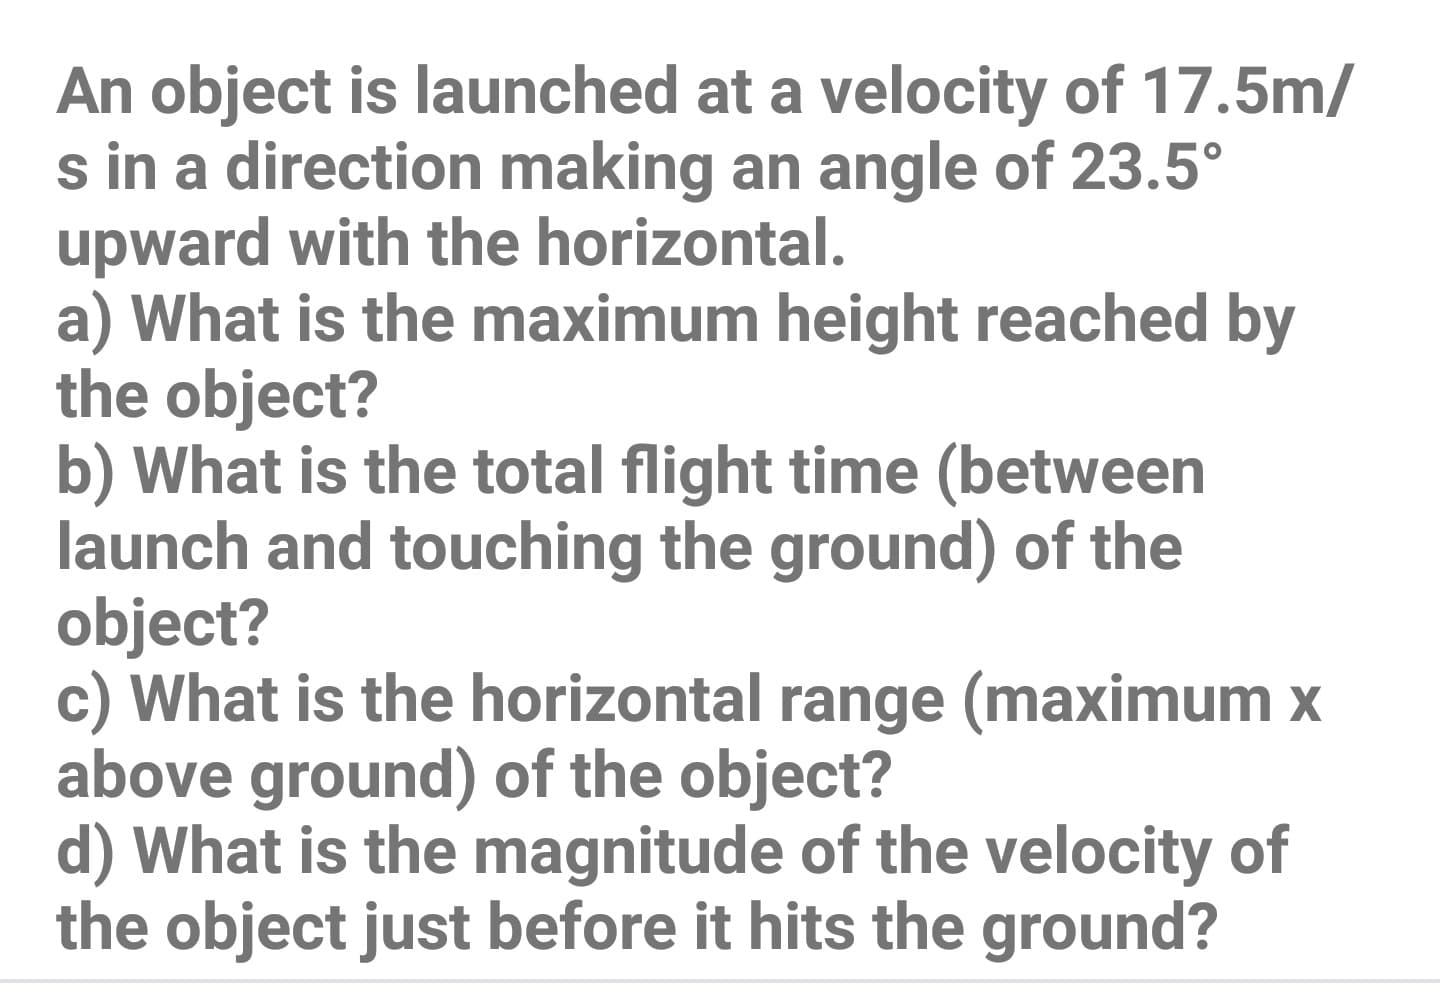 An object is launched at a velocity of 17.5m/
s in a direction making an angle of 23.5°
upward with the horizontal.
a) What is the maximum height reached by
the object?
b) What is the total flight time (between
launch and touching the ground) of the
object?
c) What is the horizontal range (maximum x
above ground) of the object?
